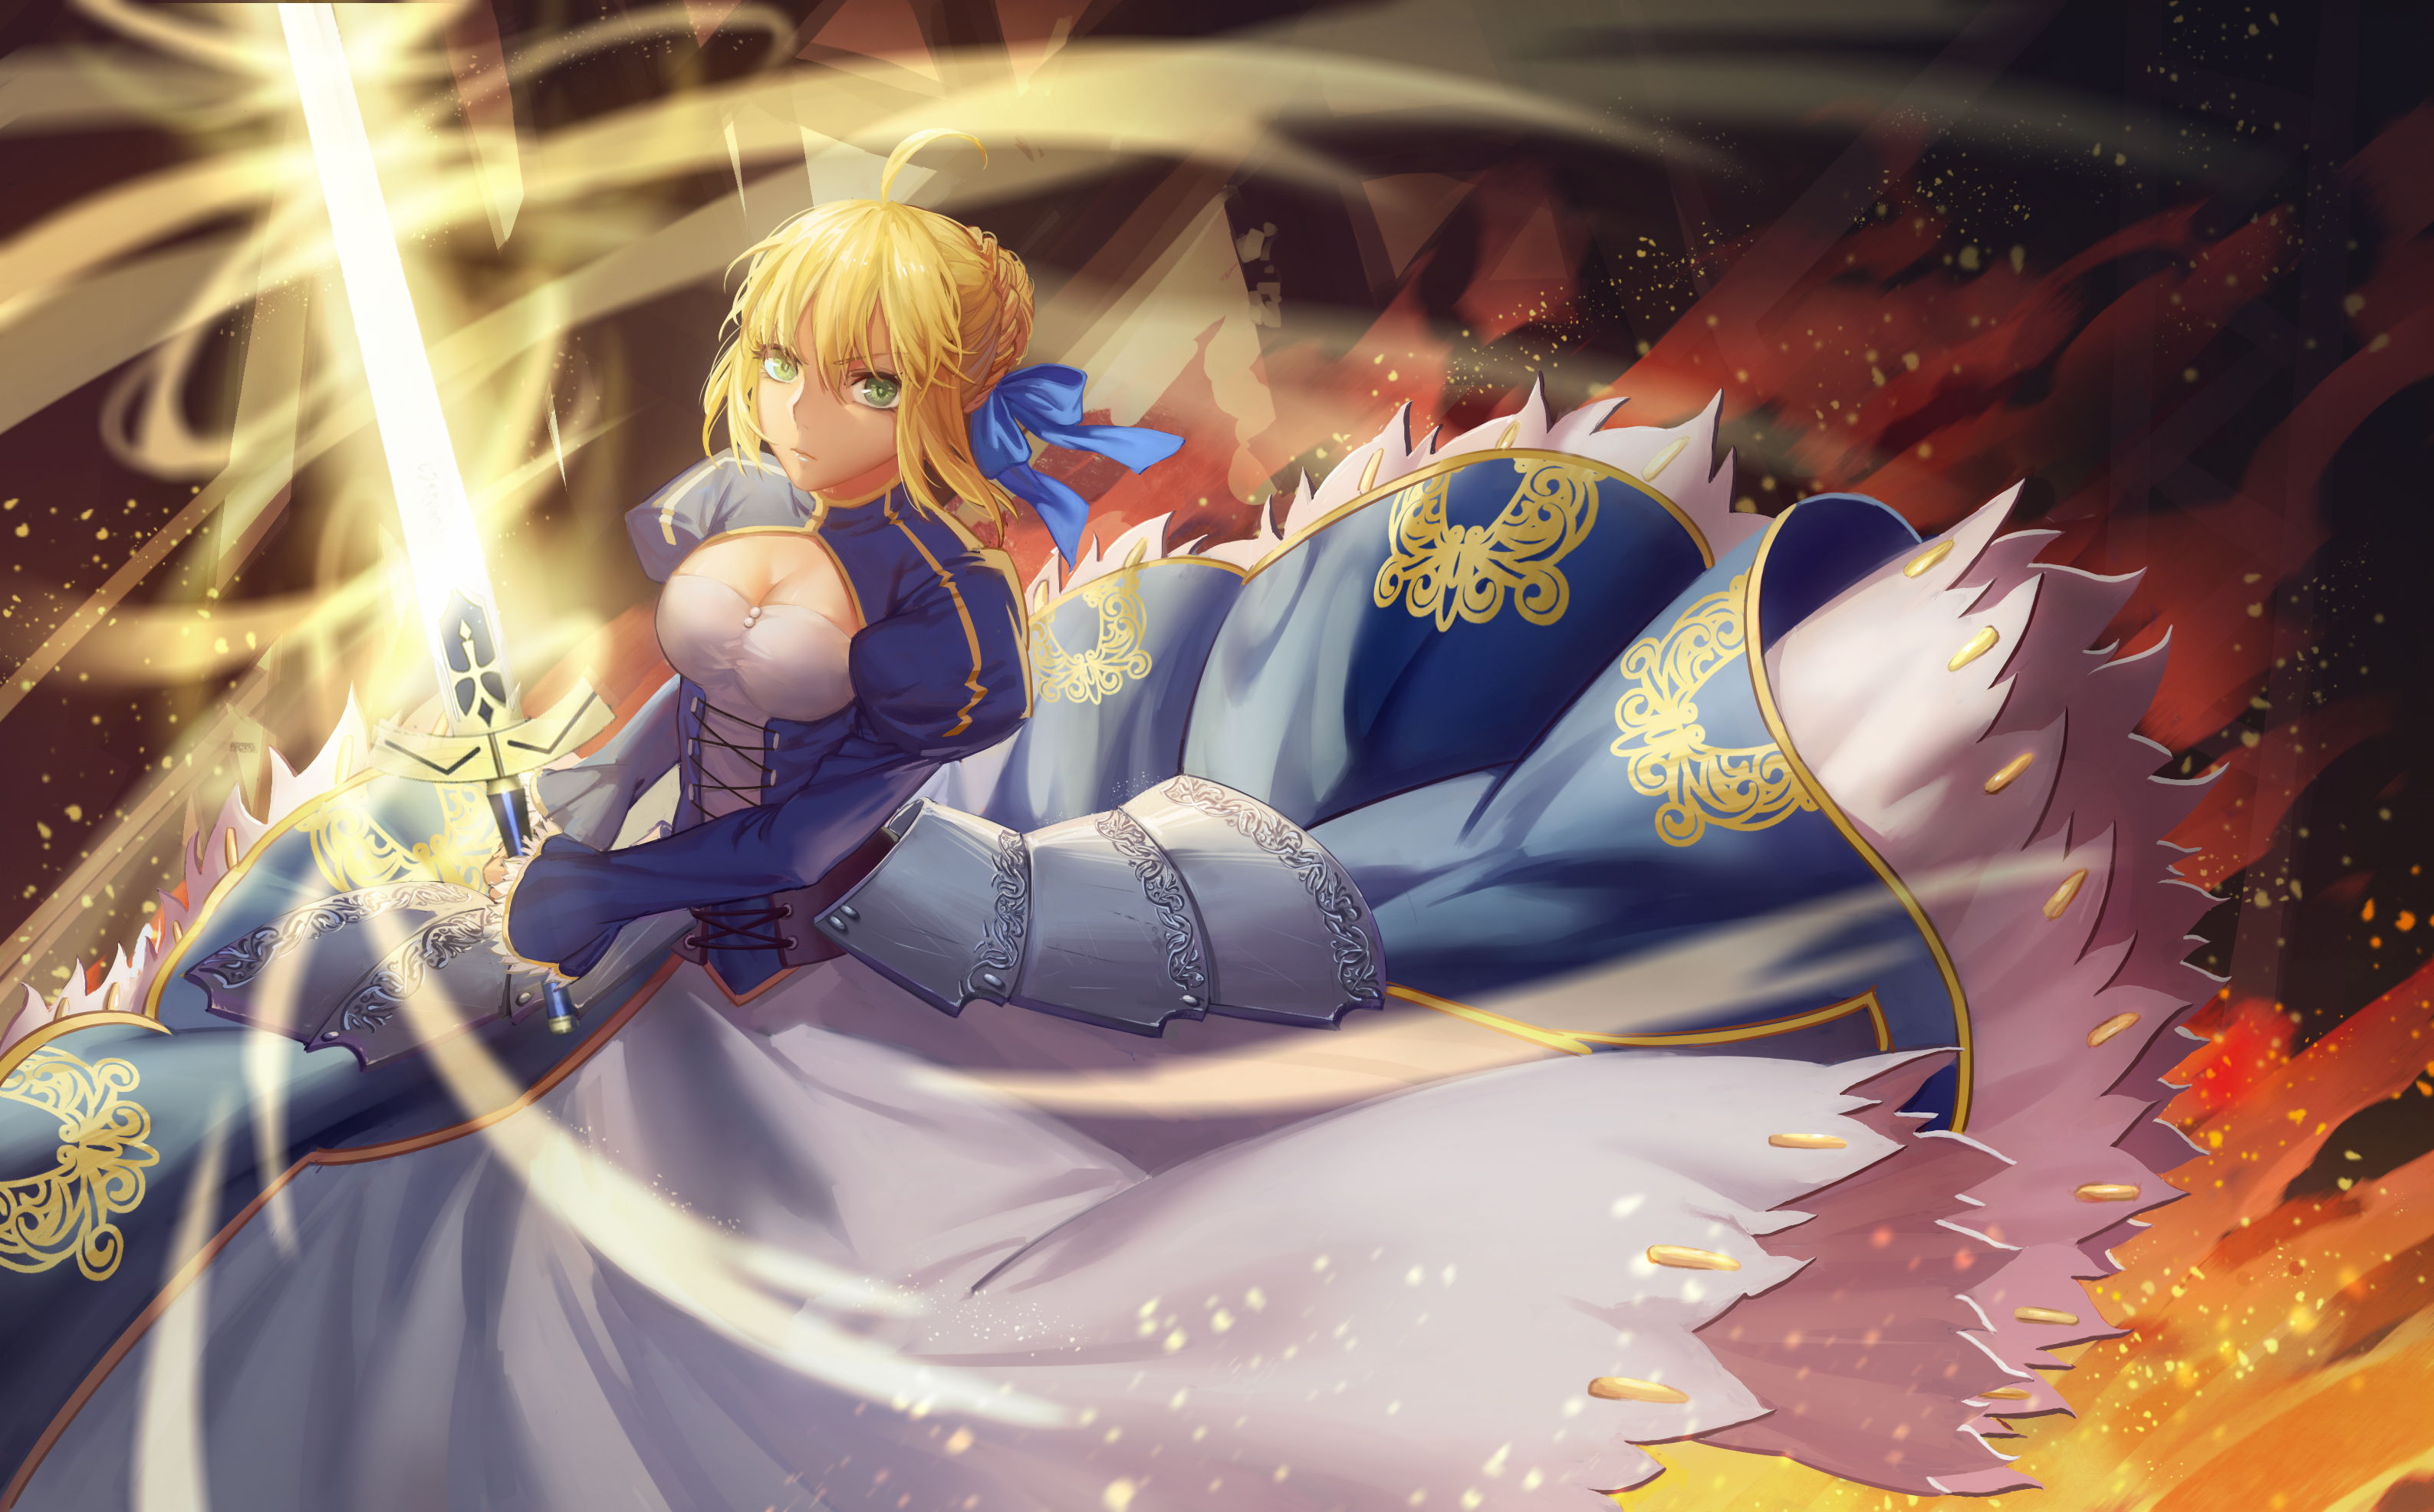 Saber (Fate Series) HD Wallpapers and Backgrounds. 